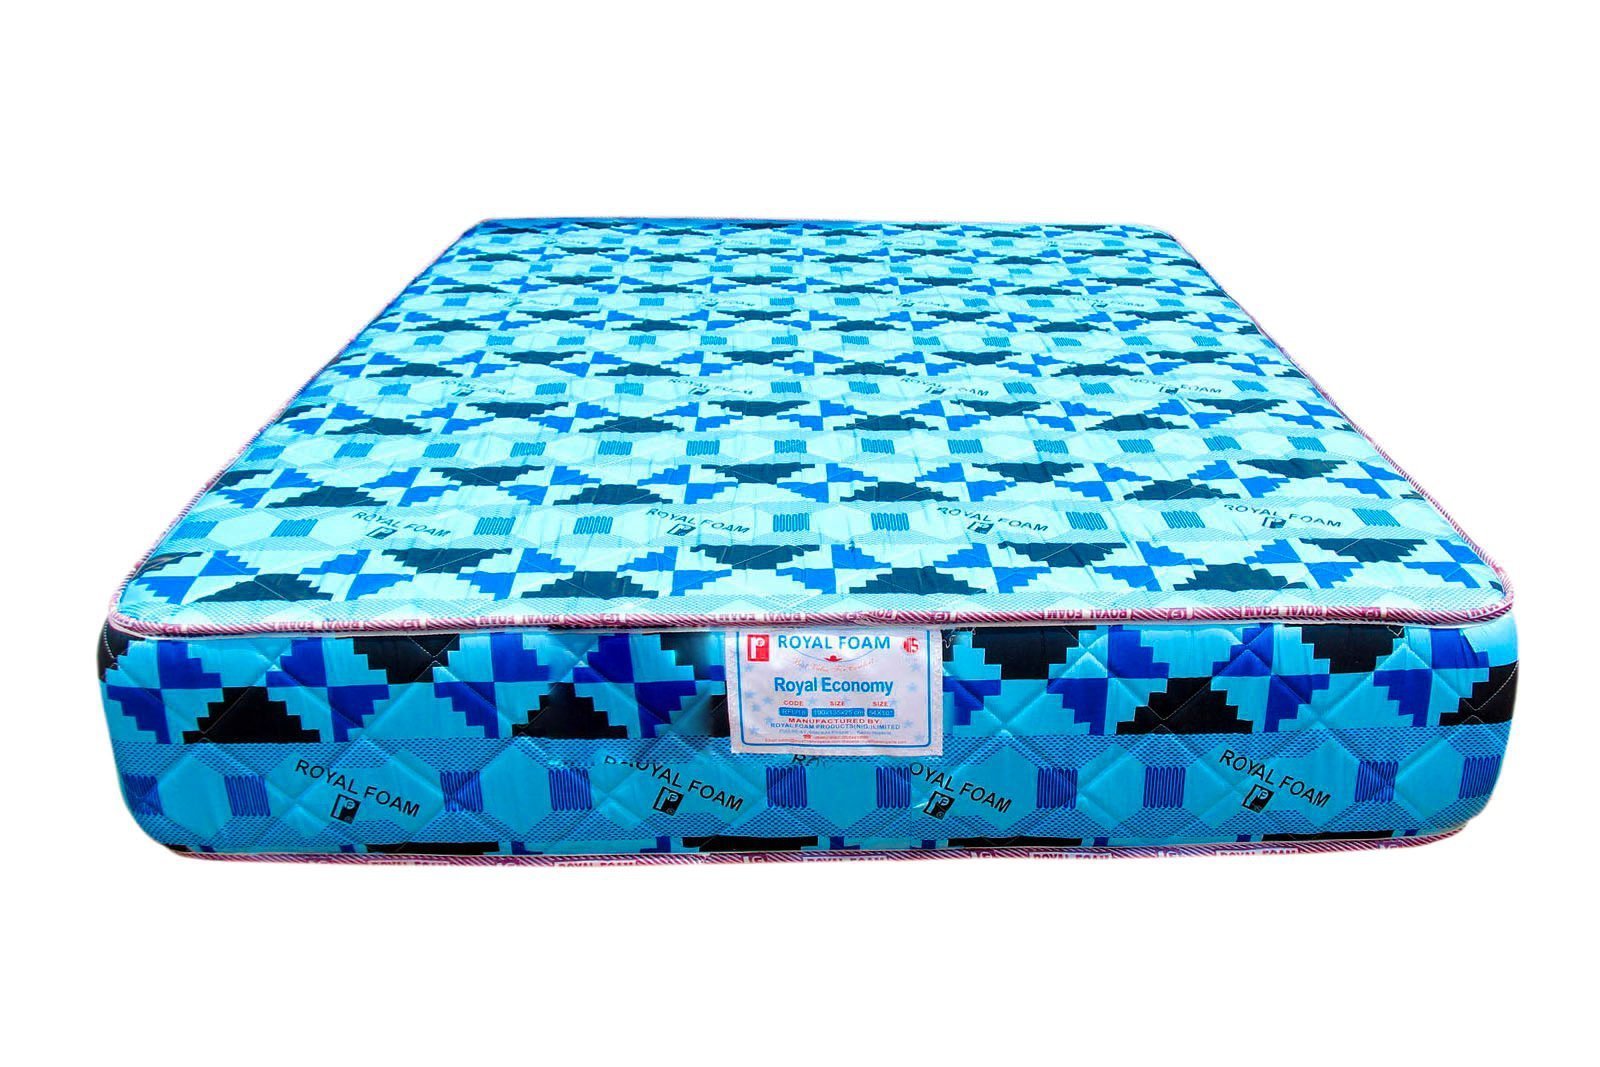 Royal Economy-Poly Cotton Fabric - Fully Quilted Mattress  [75 x 54 x 8"] [6ft x 4.4ft x 8inches](Lagos Only)